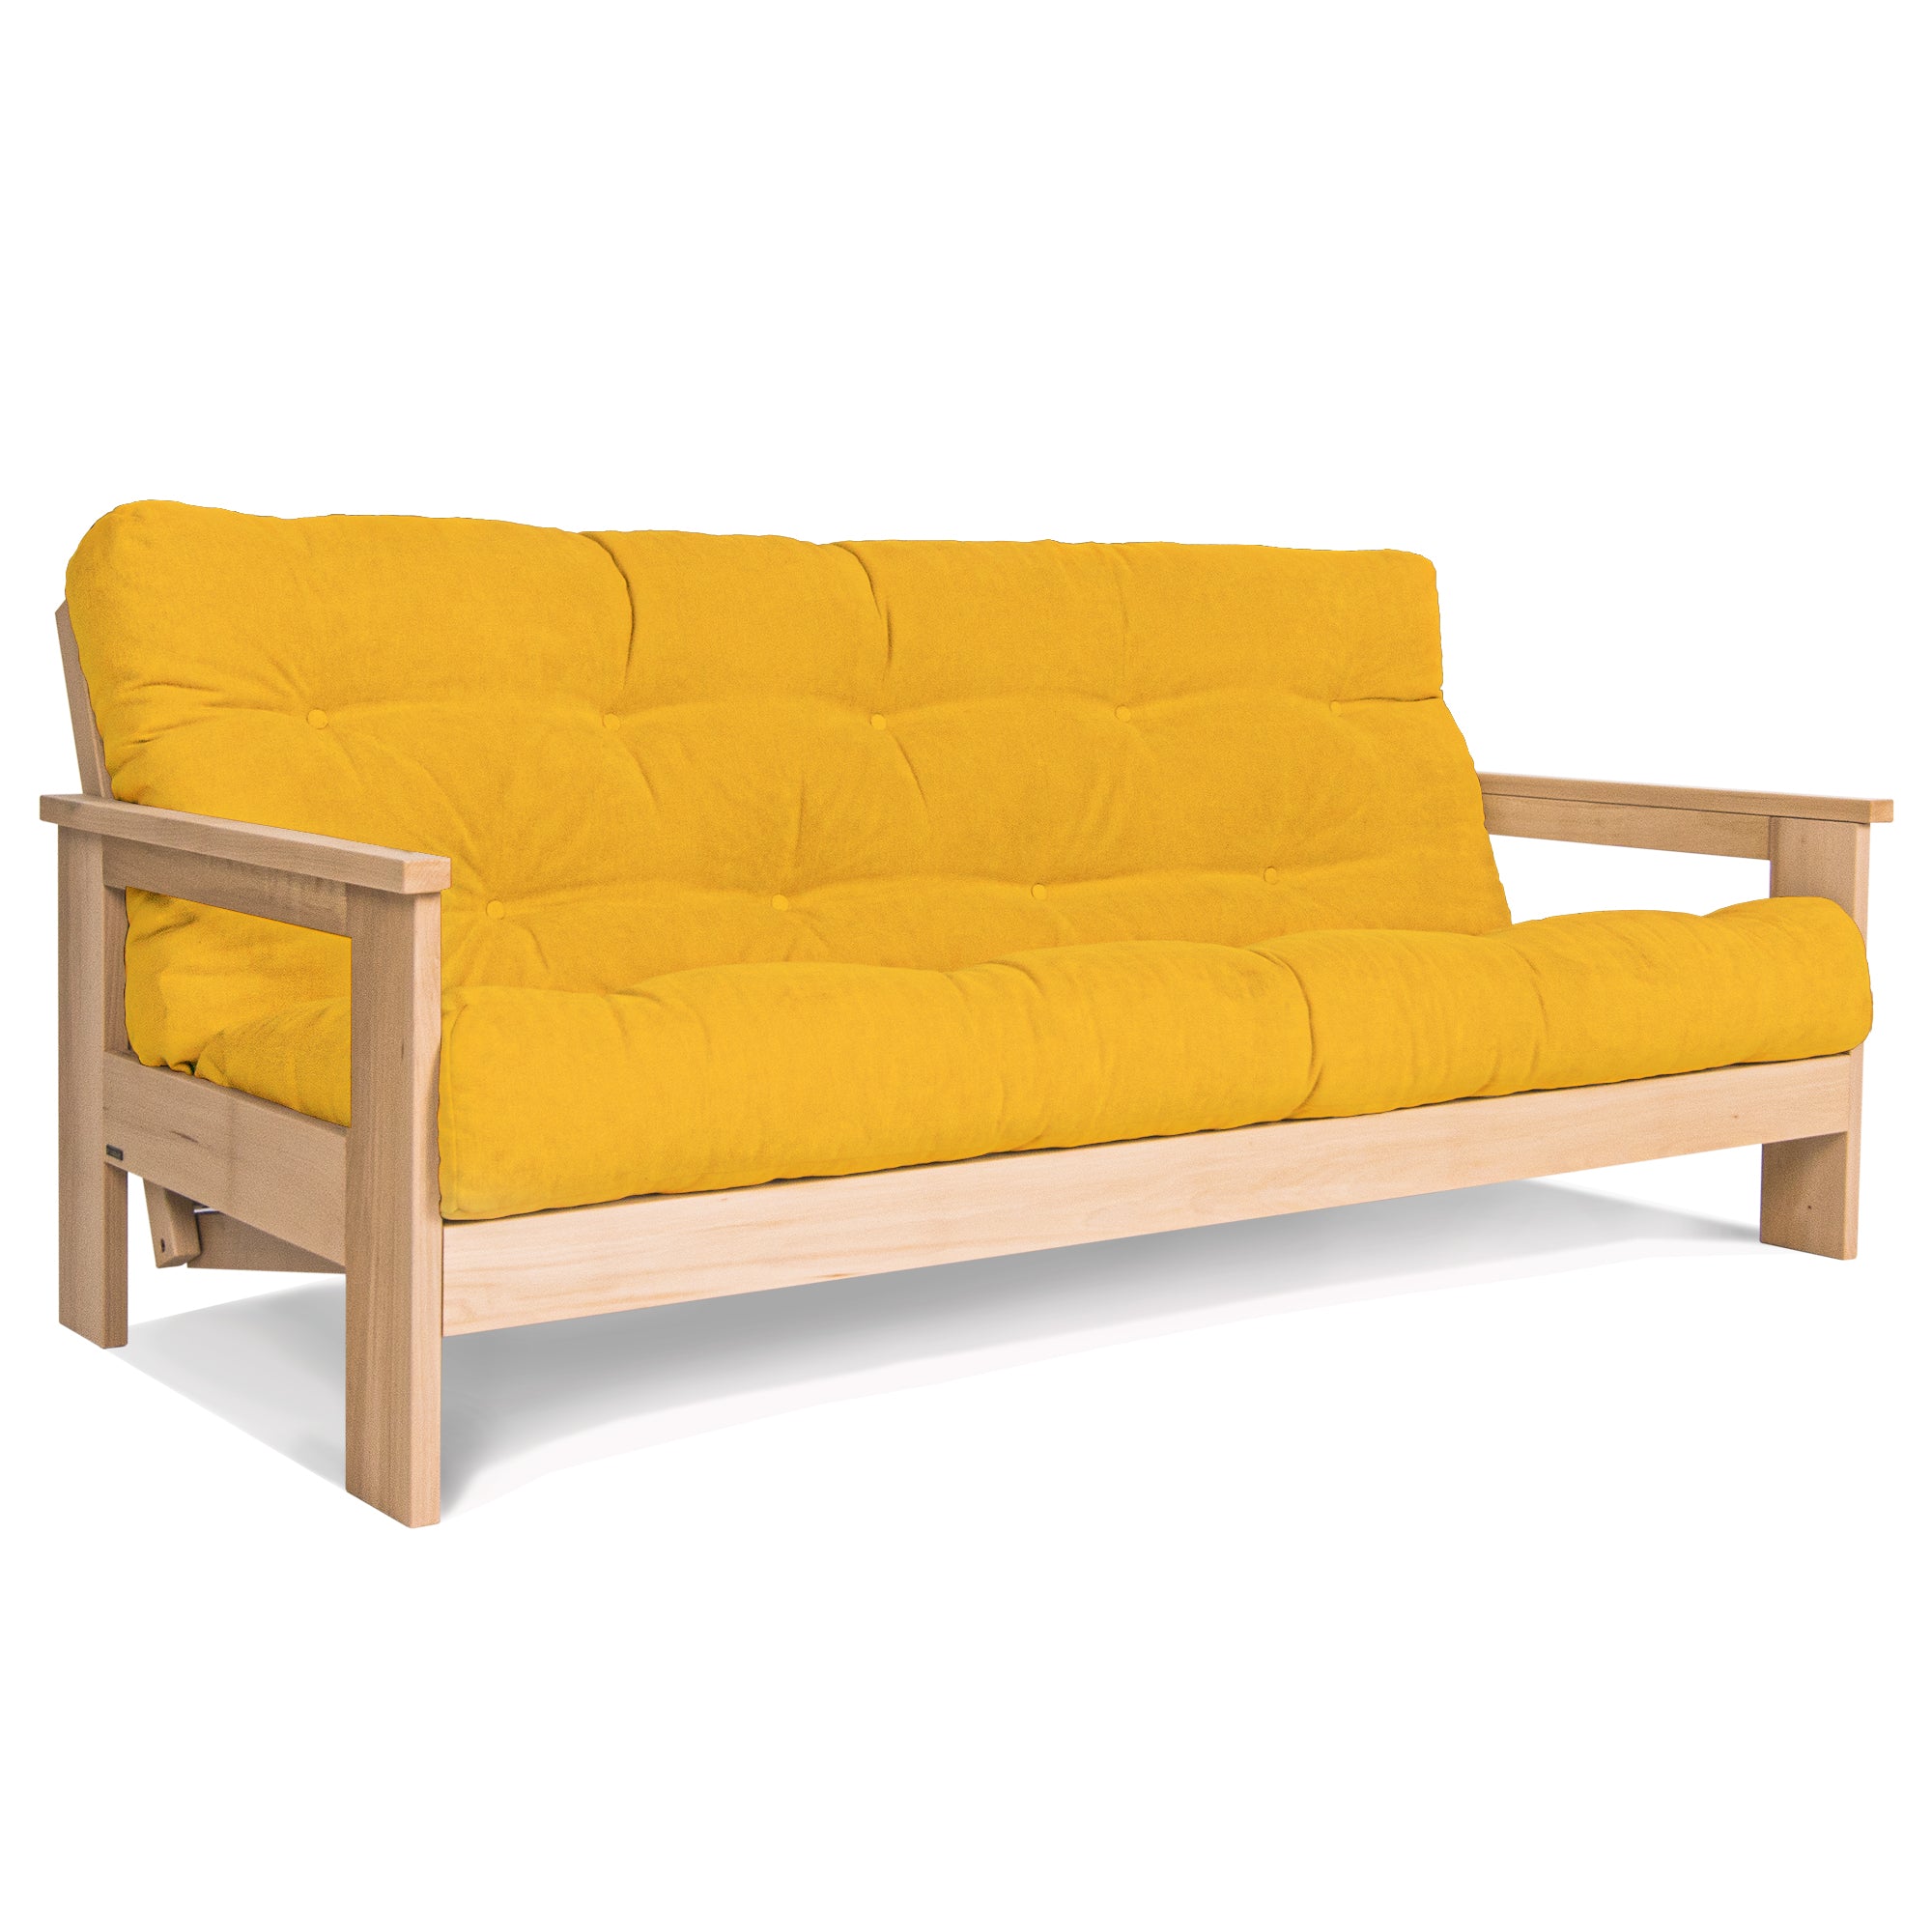 MEXICO Folding Sofa Bed-Beech Wood Frame-Natural Colour--yellow fabric